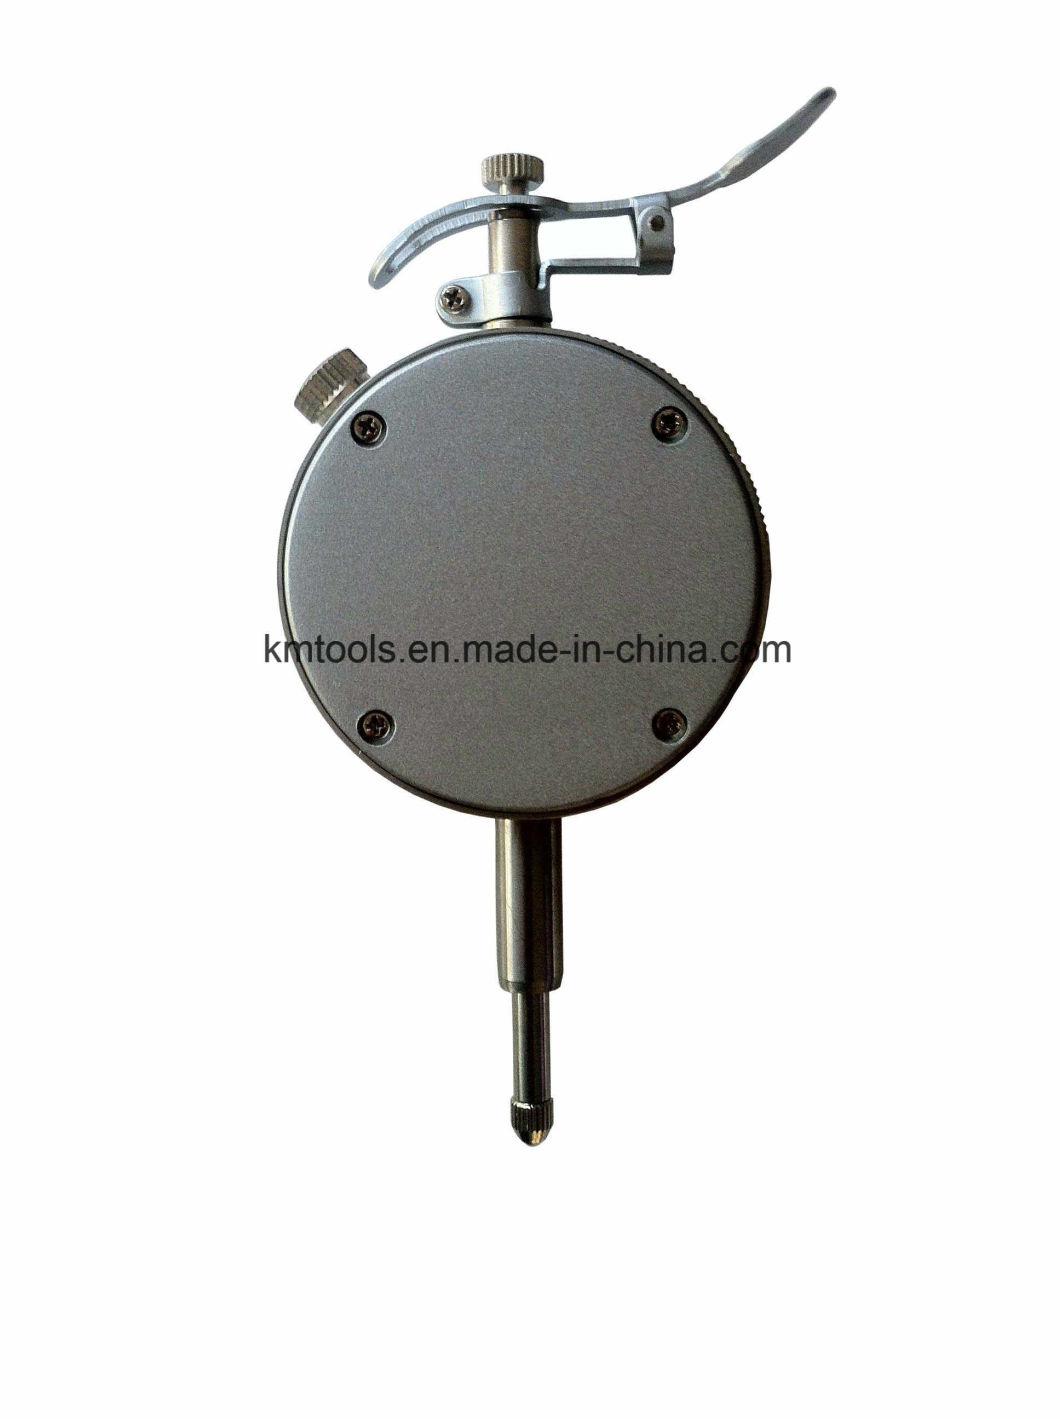 Mechanical Dial Indicator with Lifting Lever